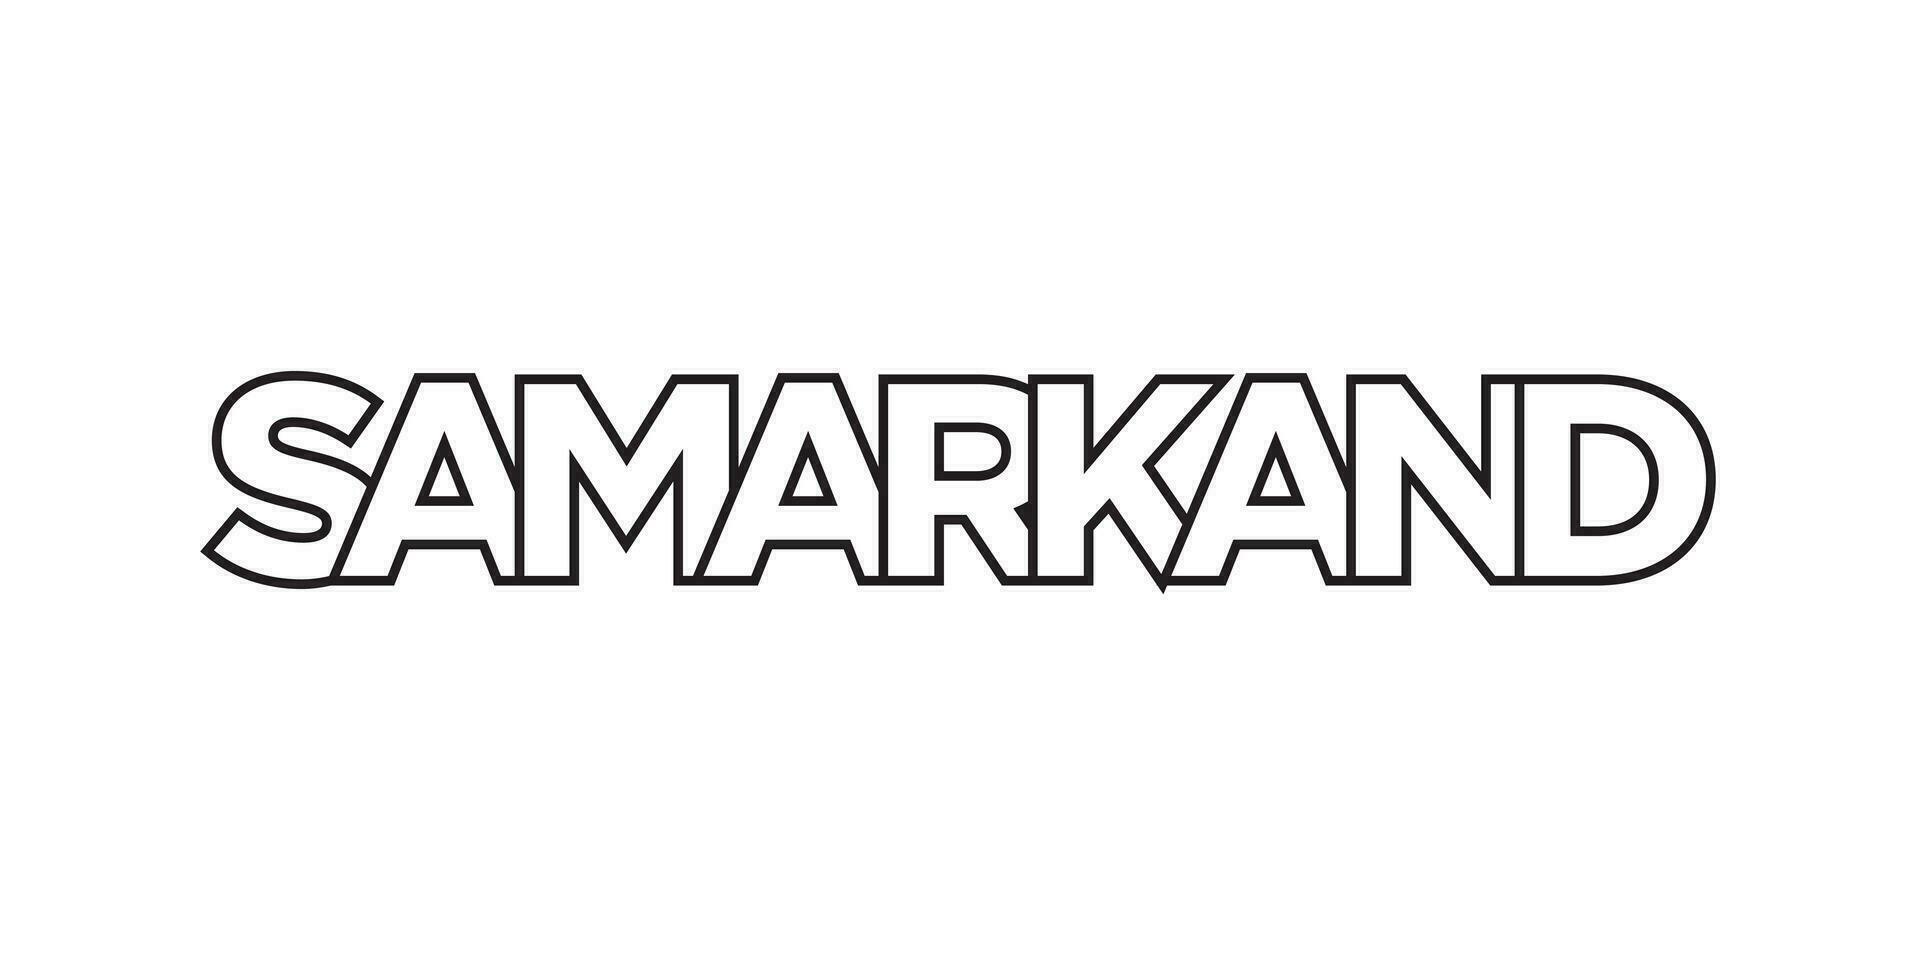 Samarkand in the Uzbekistan emblem. The design features a geometric style, vector illustration with bold typography in a modern font. The graphic slogan lettering.